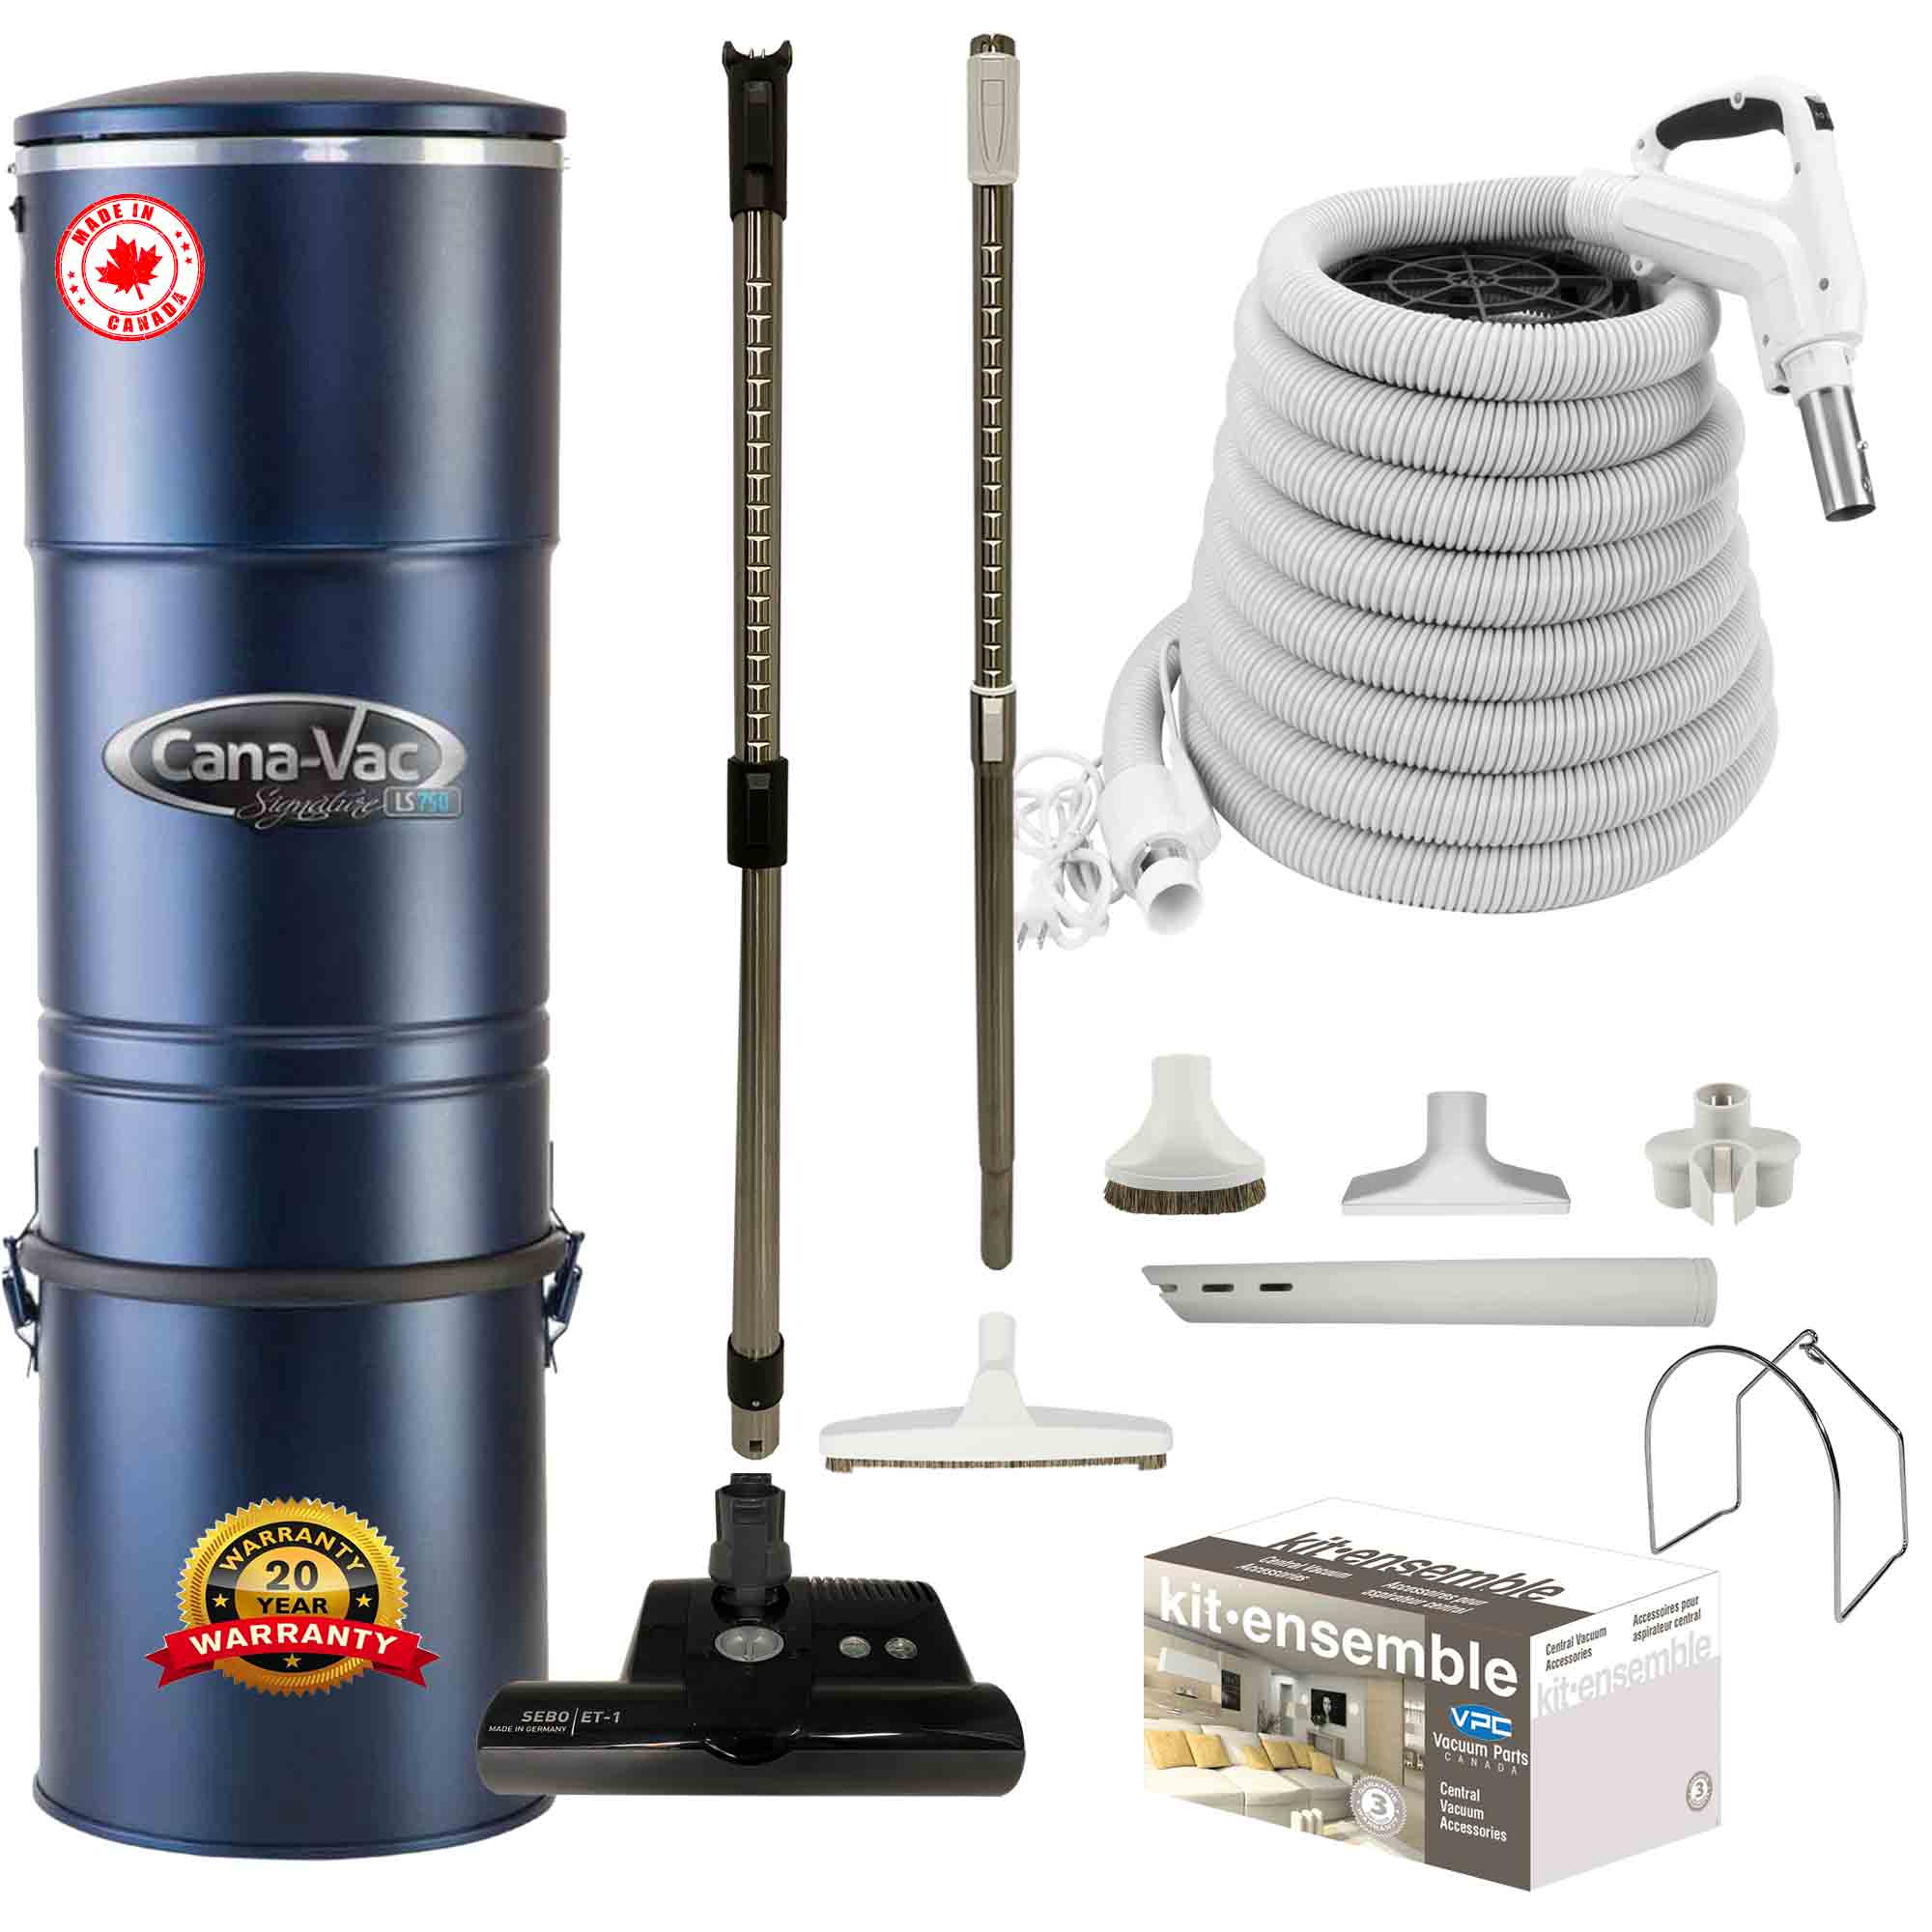 Cana-Vac LS790 Central Vacuum with SEBO (Black) Powerhead and Premium Electric Package (White)